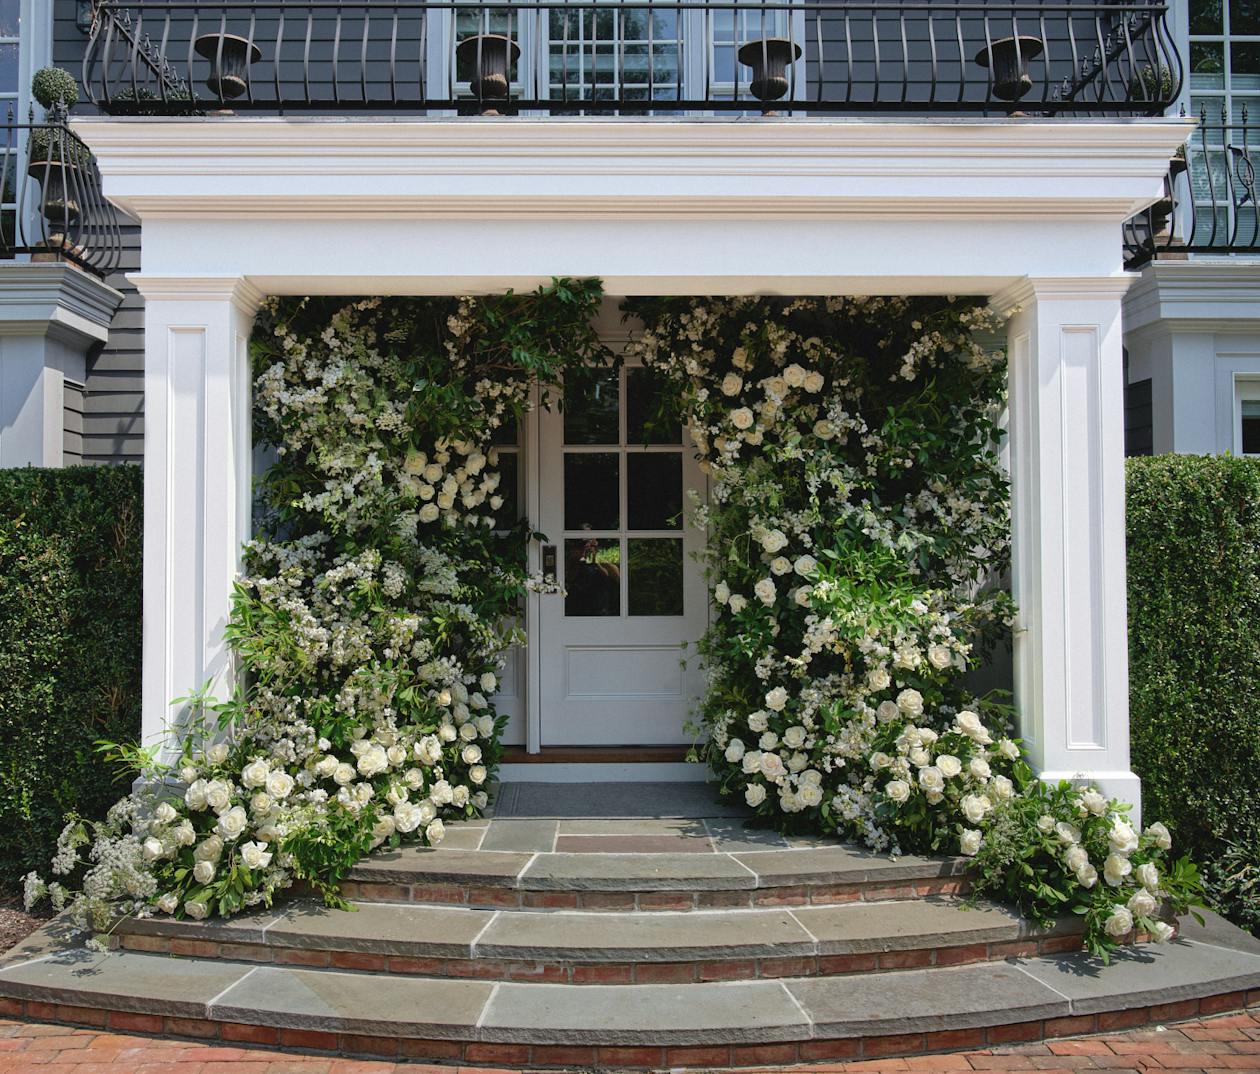 Intimate Wedding Celebration in the Hamptons With Florals and Greenery Surrounding Private Residence Front Door Entrance | PartySlate